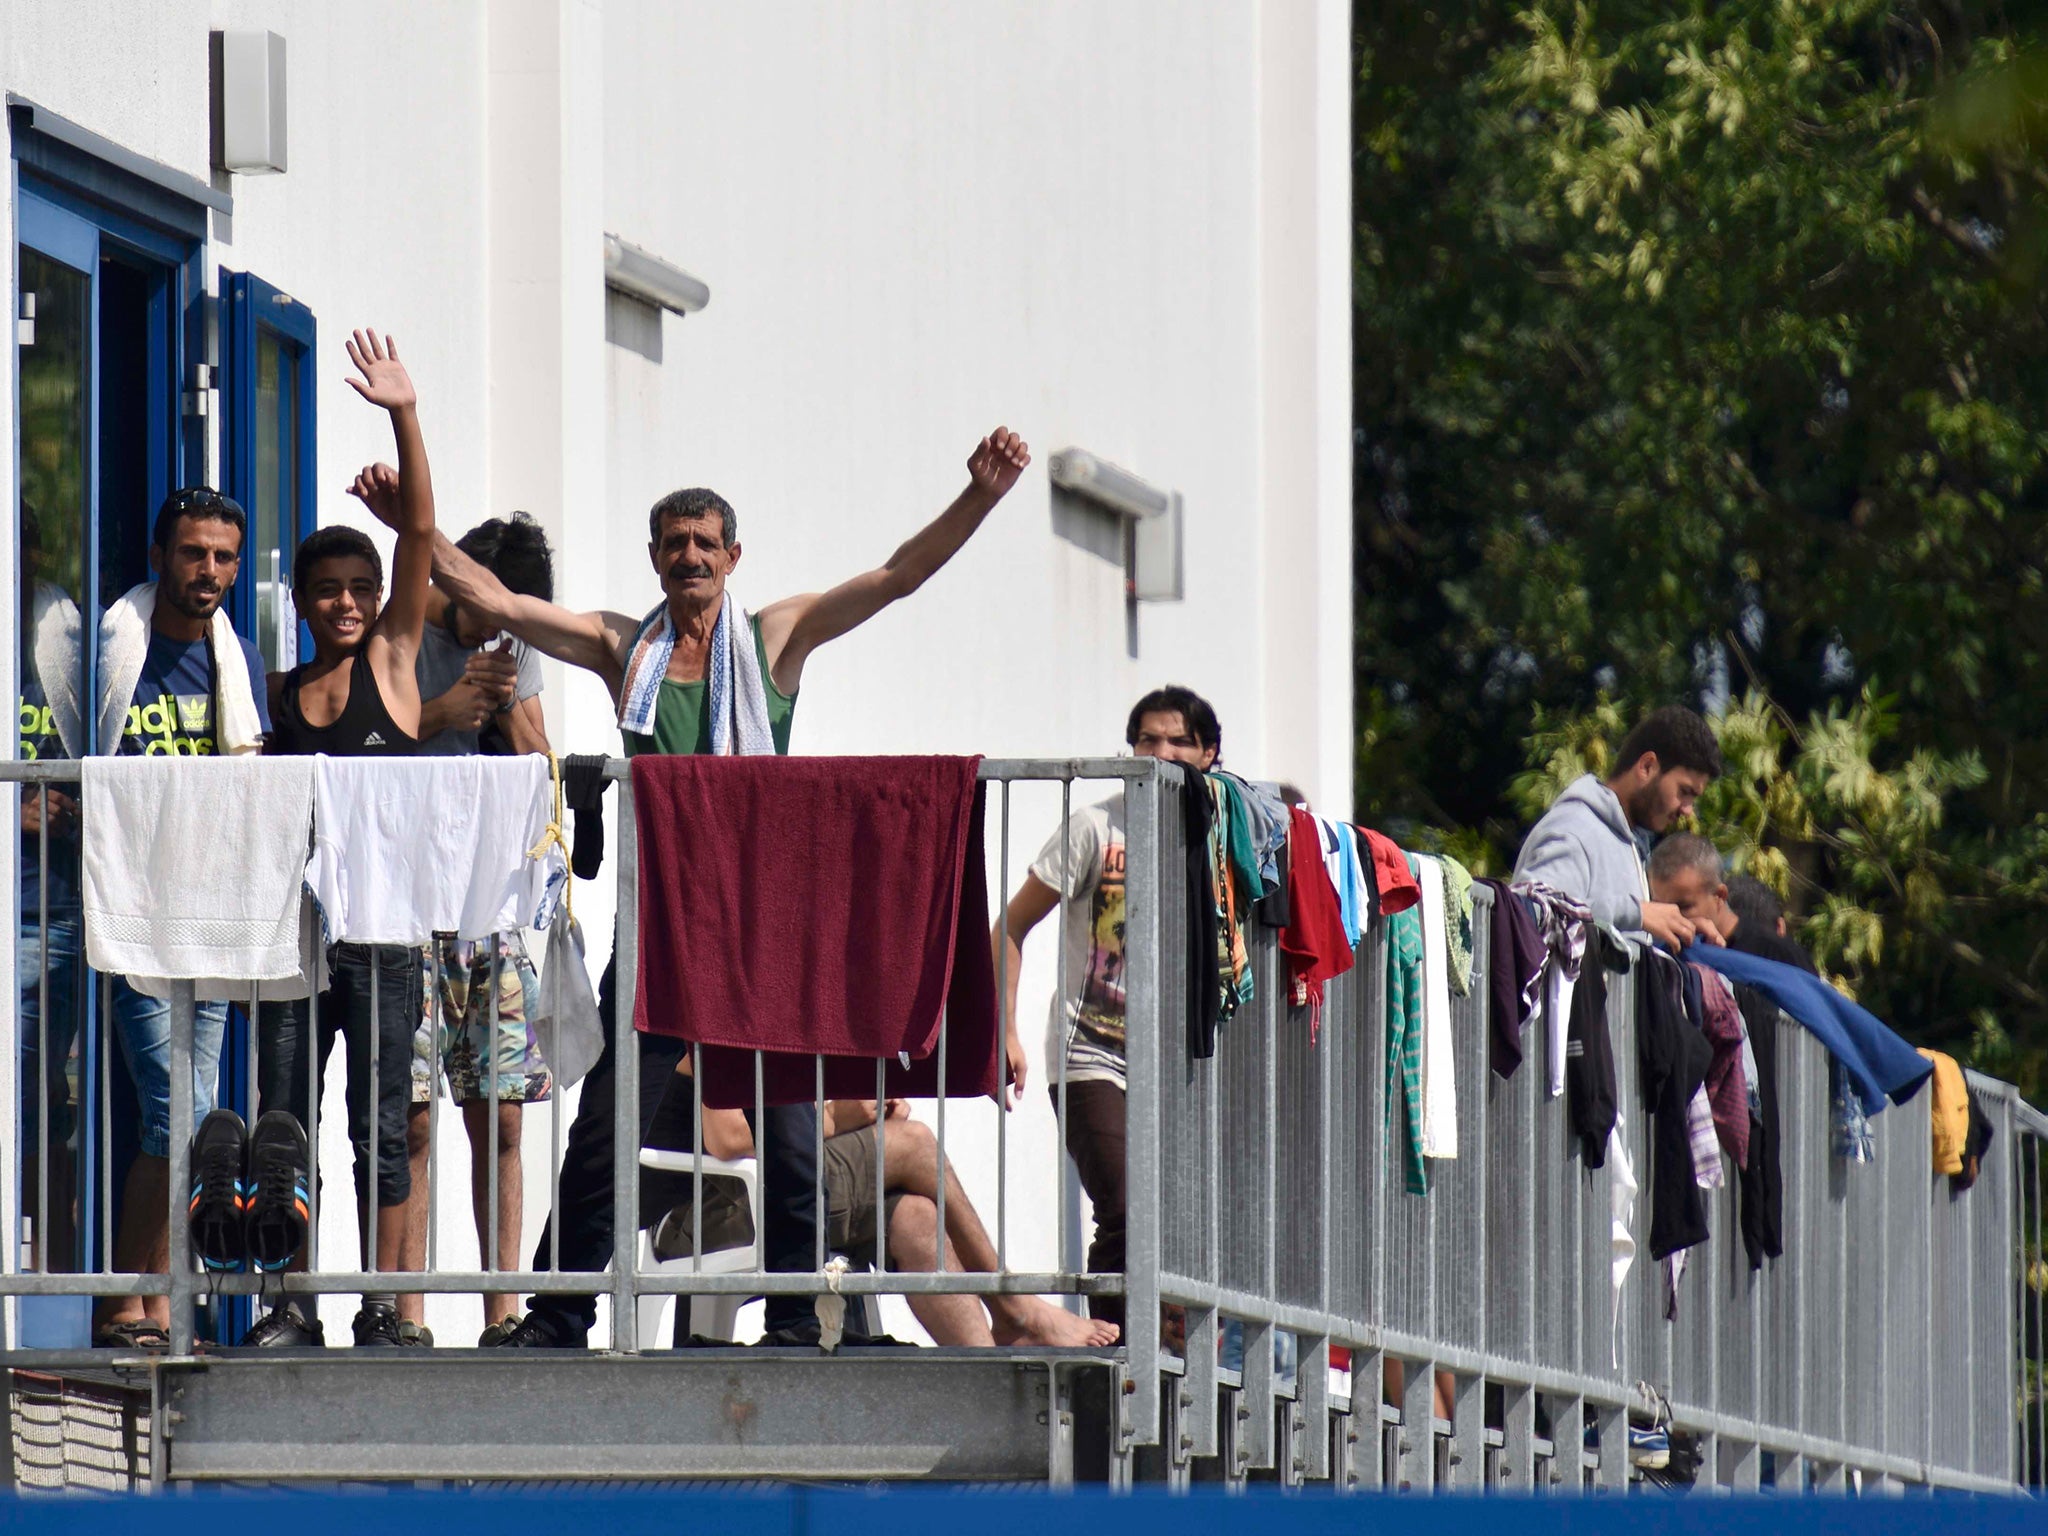 Migrants wave as they stand on the staircase of an asylum seekers accomodation facility in the eastern German town of Heidenau